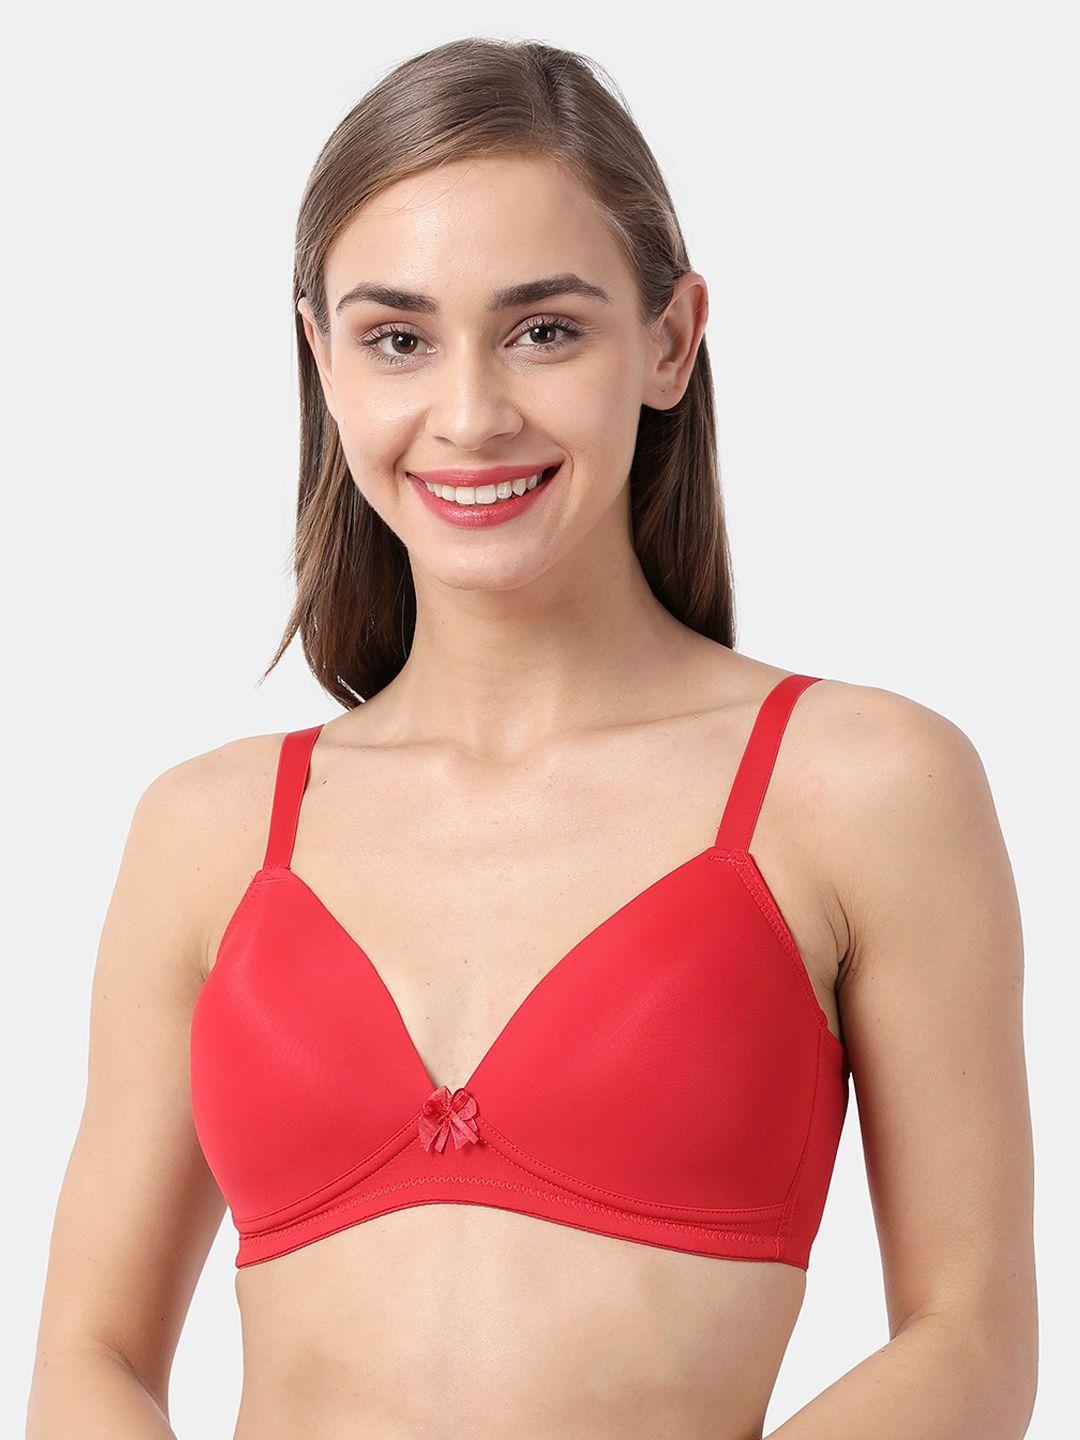 shyaway red solid underwired heavily padded everyday bra st007-moltenlava-32b